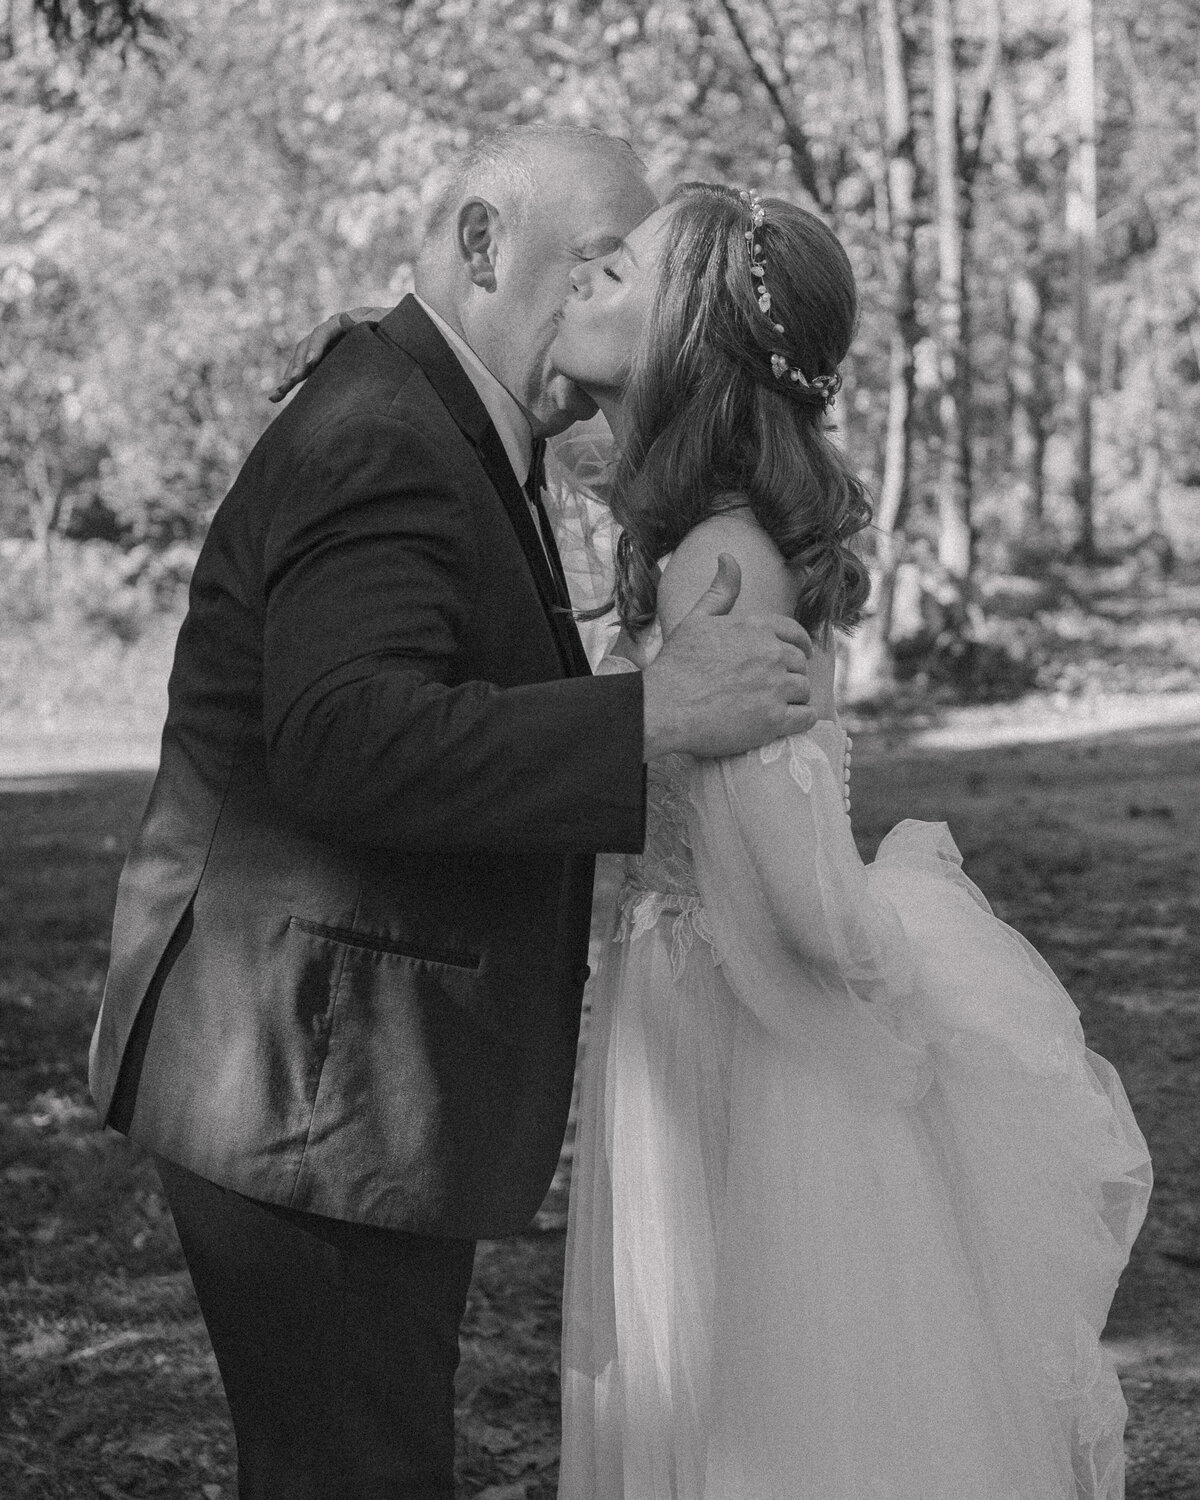 Heartwarming black and white photo of a father sharing a tender kiss with his daughter, the bride, on her wedding day. The bride, in a delicate lace gown, embraces her father amidst a serene, wooded backdrop, capturing a candid, emotional moment in a documentary style.